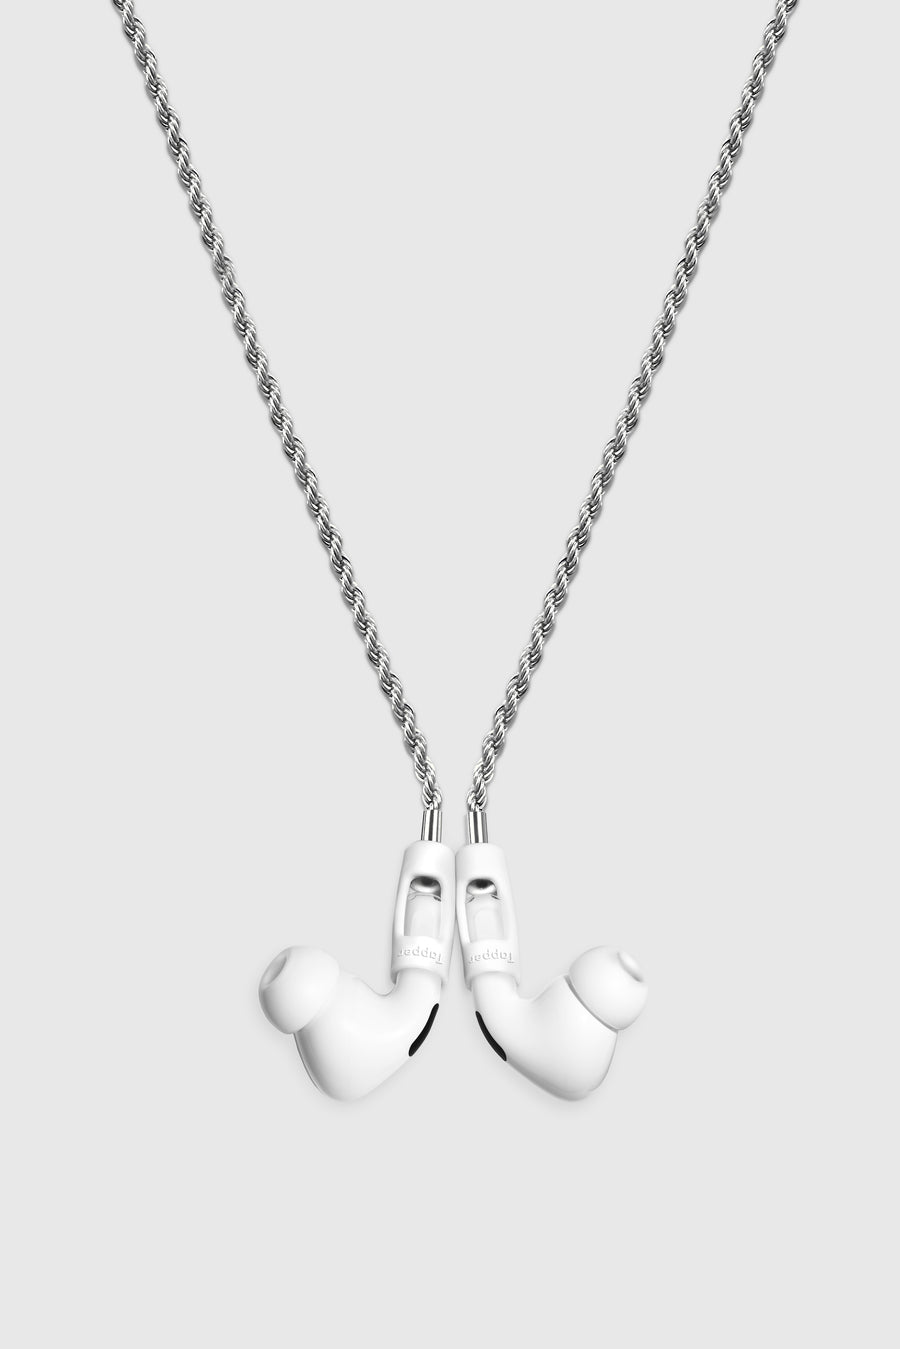 Tapper's real 925 silver plated original rope chain jewelry necklace protects your Apple AirPods & AirPods Pro. The luxurious, elevated & accessible rope chain jewellery plated in precious metals snaps the AirPods around your neck. Lost your AirPods? Magnetic lock for convenient and hassle-free safekeeping around your neck. The next must-have & affordable AirPods accessory crafted for ultimate luxury. Compatible with AirPods & AirPods Pro. Designed in Sweden by Tapper. Free Shipping at gettapper.com